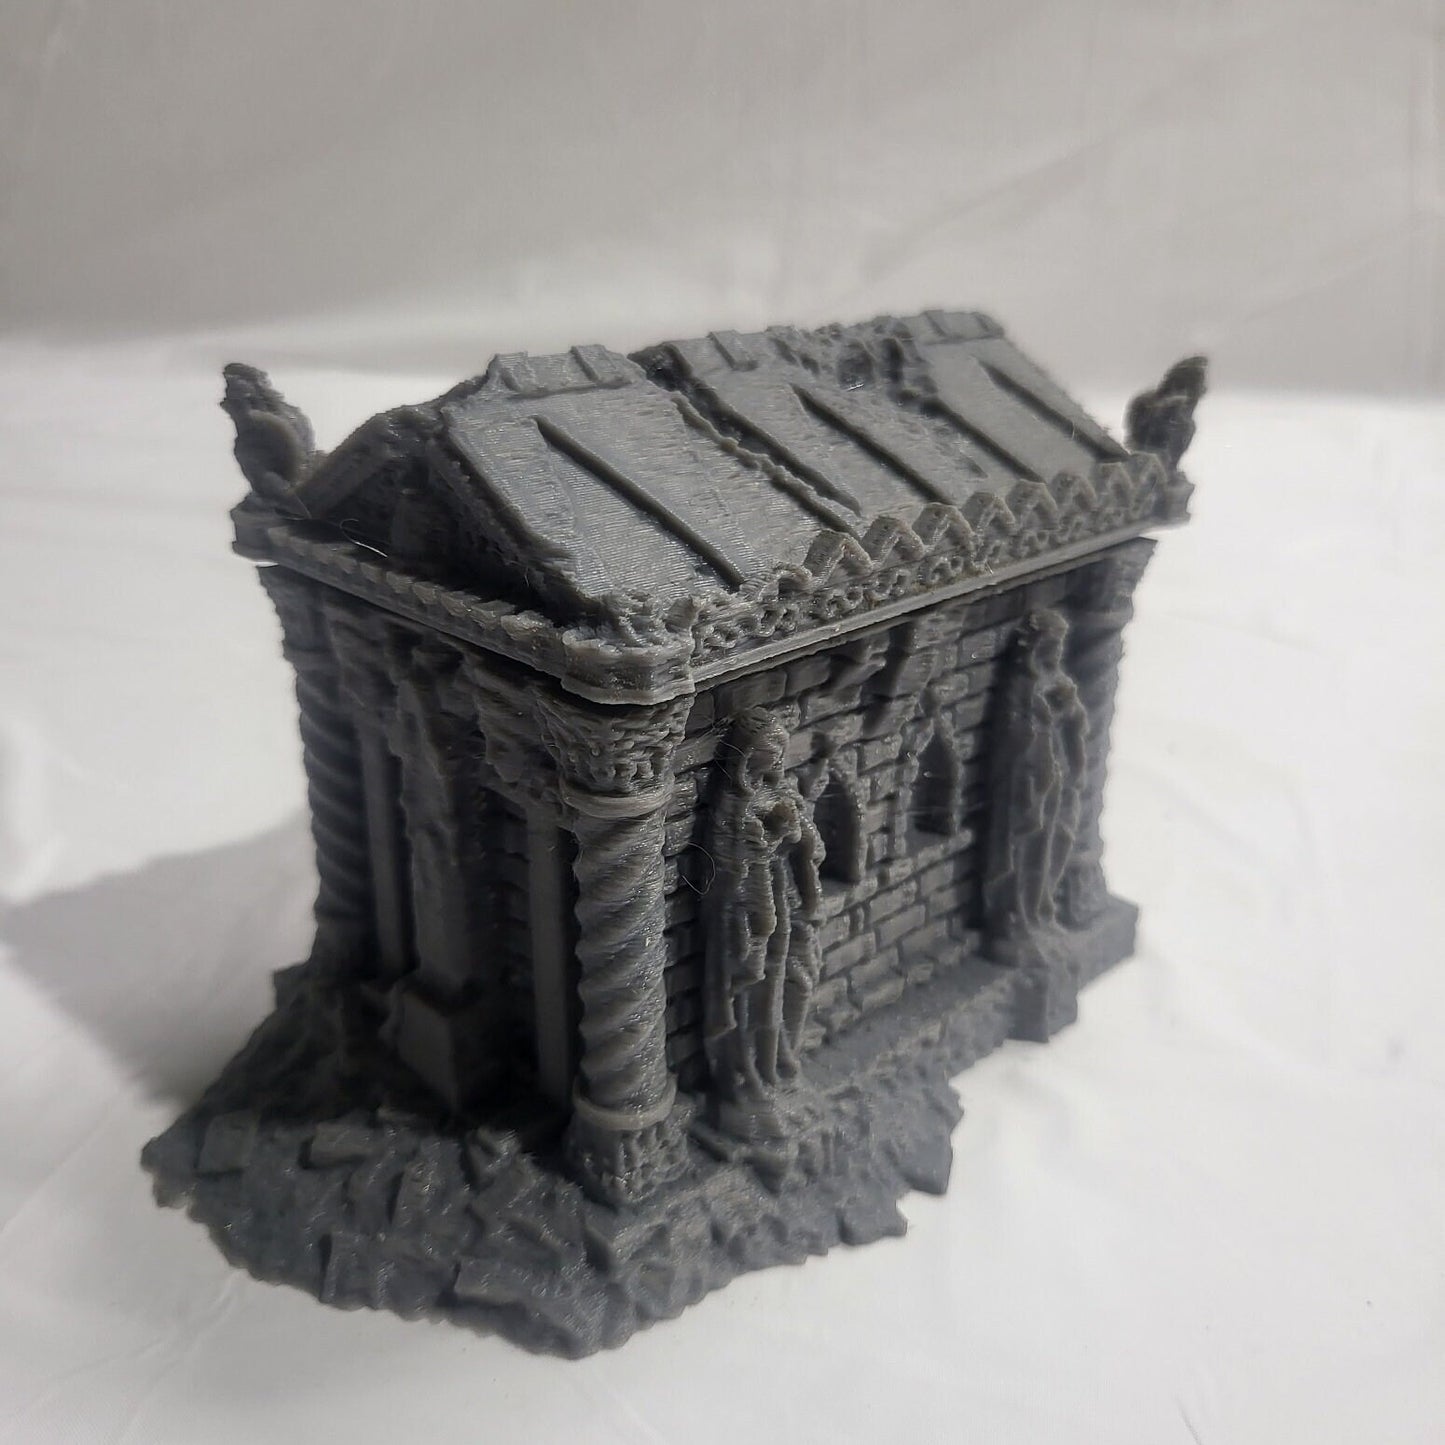 Small Tomb, Crypt, Dungeons and Dragons